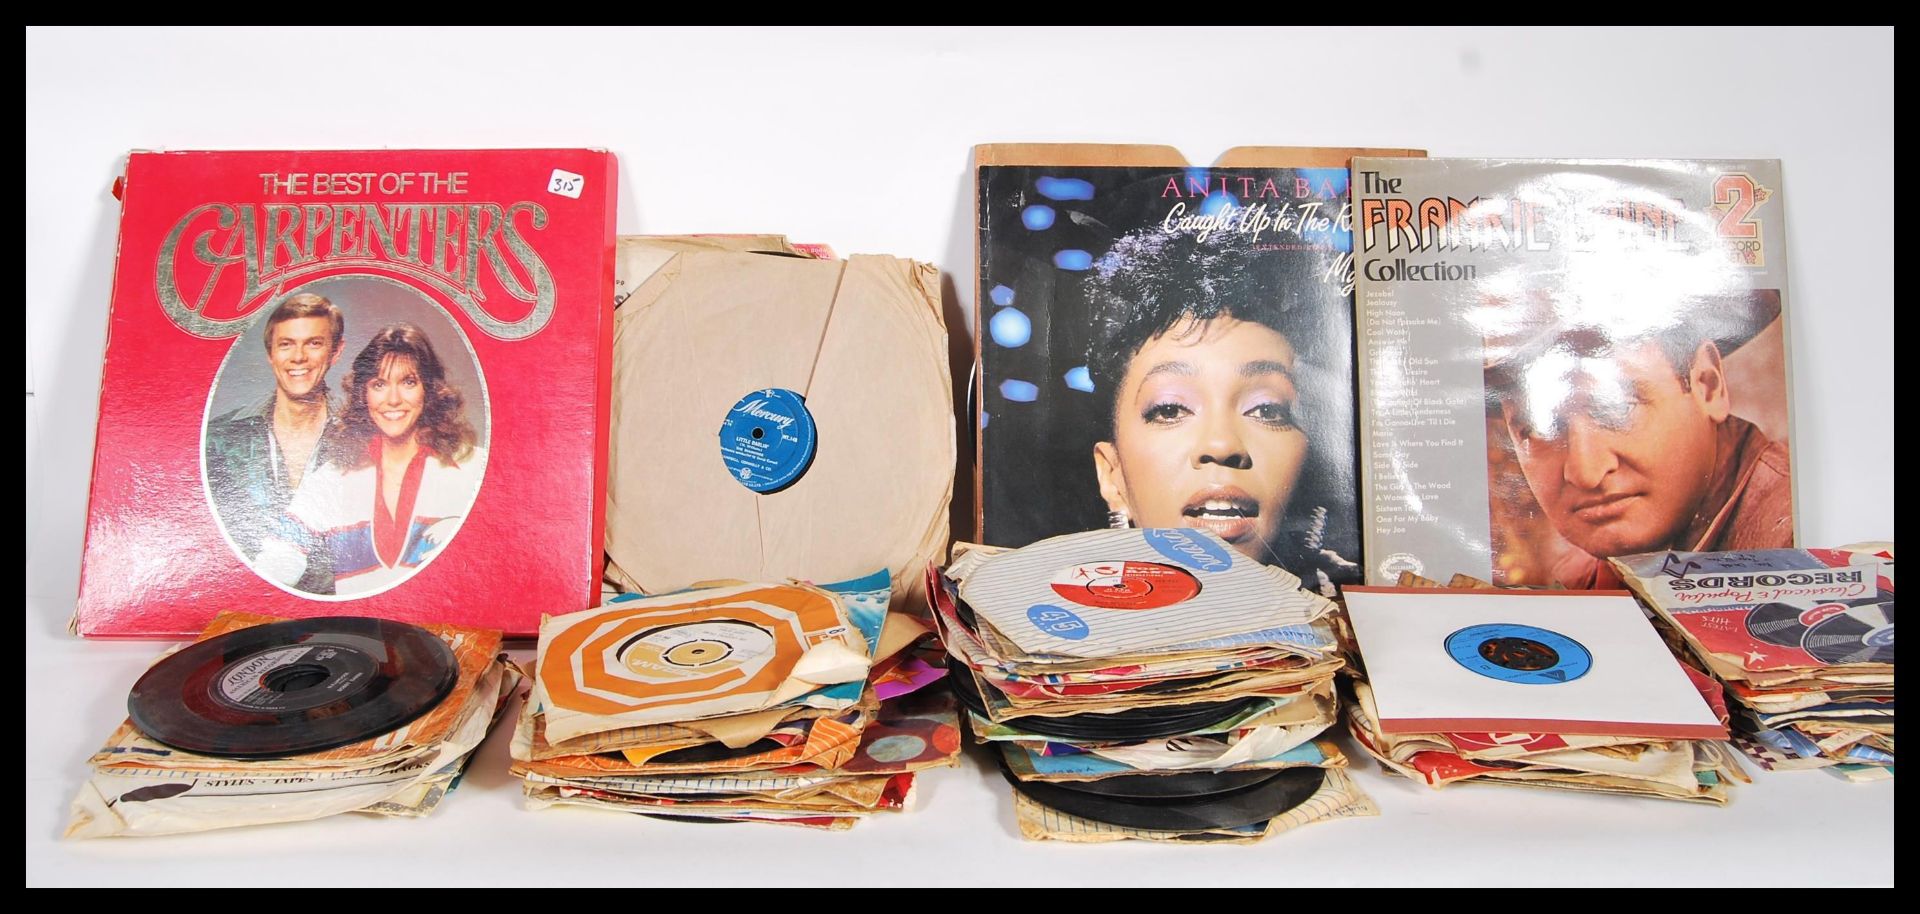 A collection of 45rpm vinyl 7" singles featuring various artist to include Boney M, Elvis Presley,